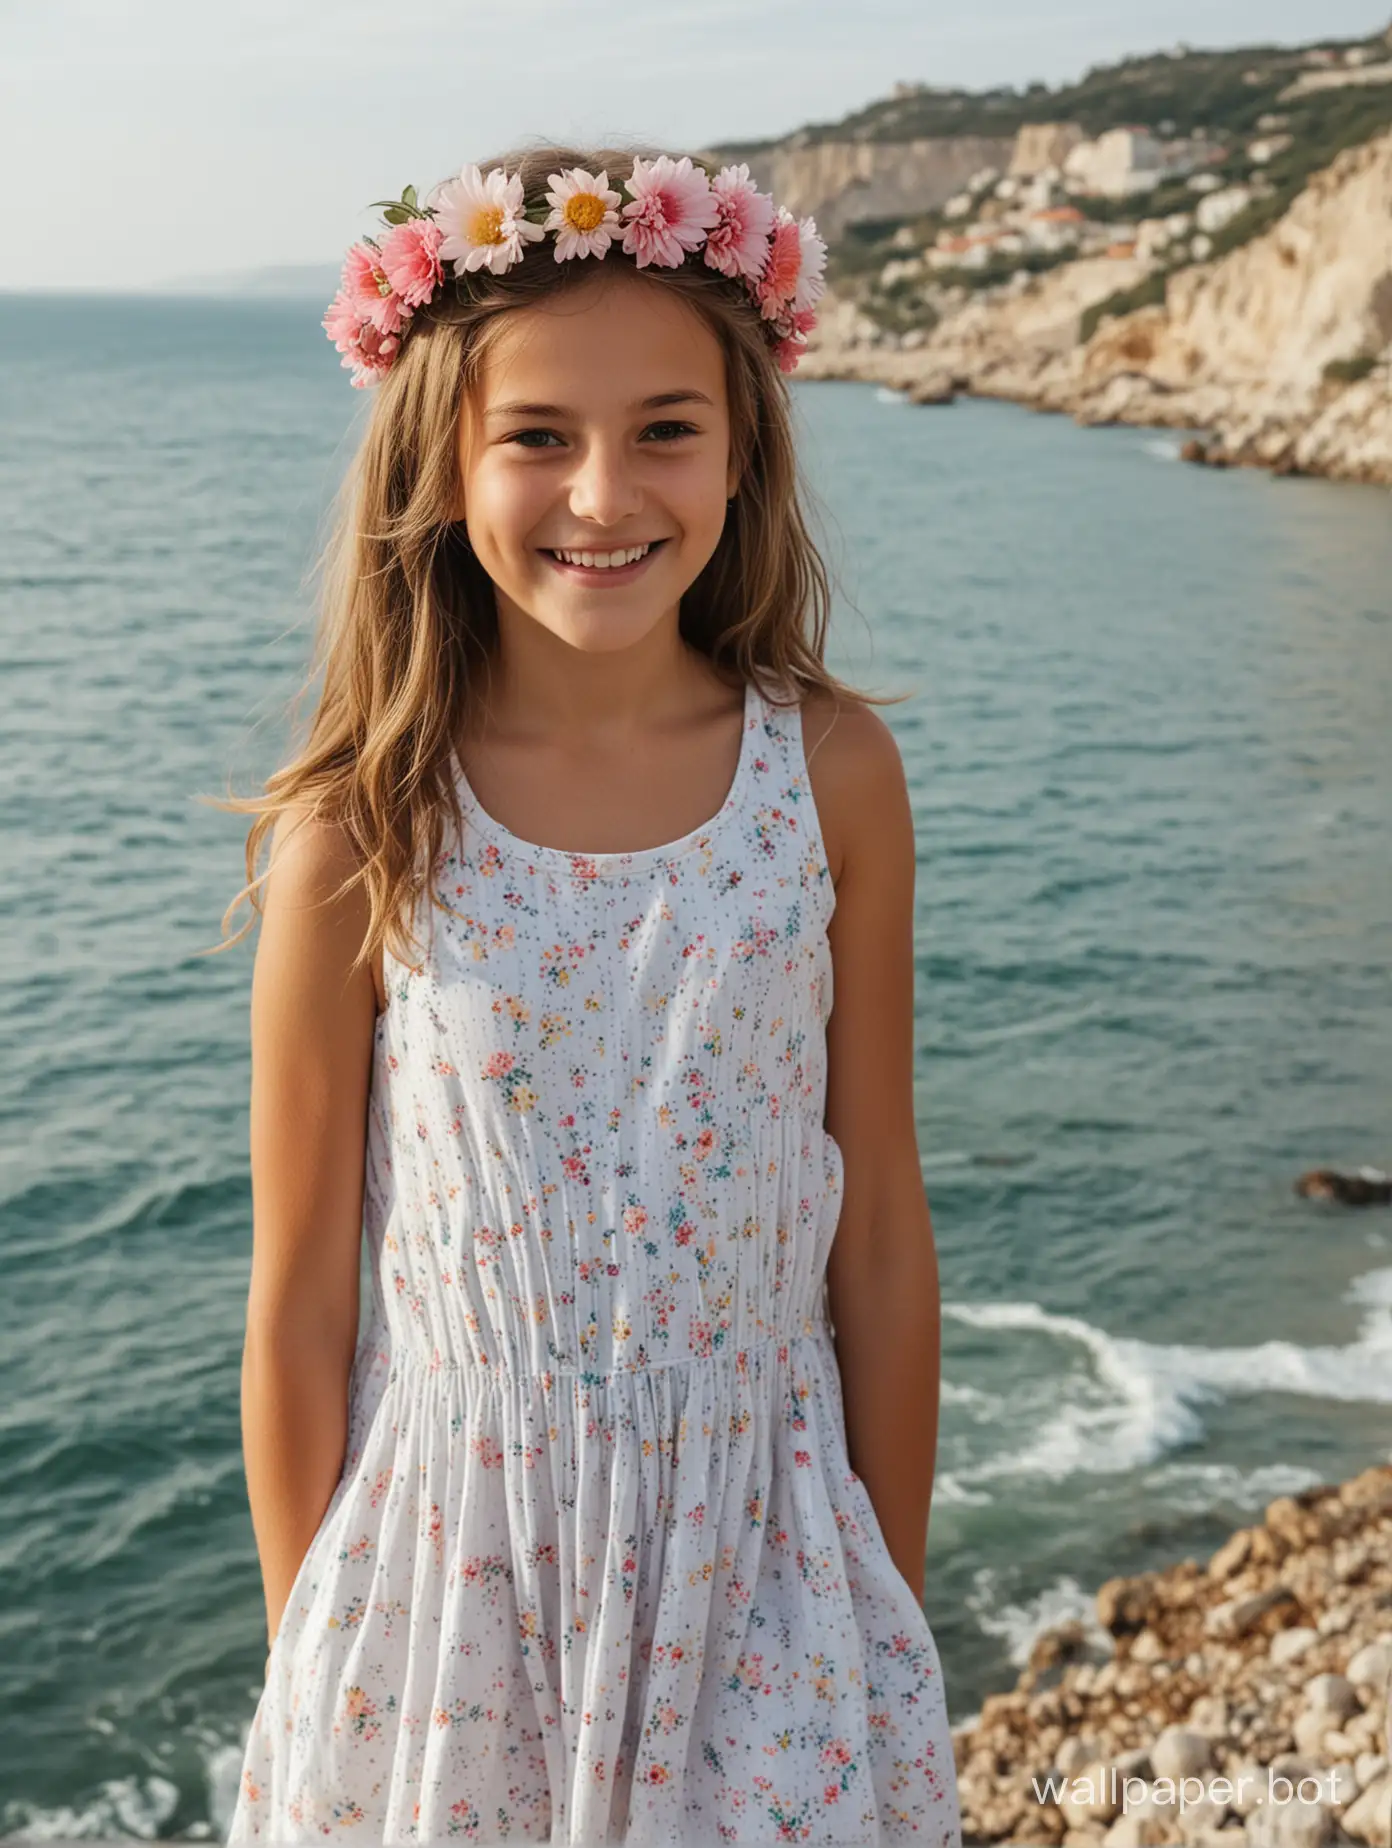 11-year-old girl, dress, flower crown on her head, full height, smile, Crimea, view of the sea, side view